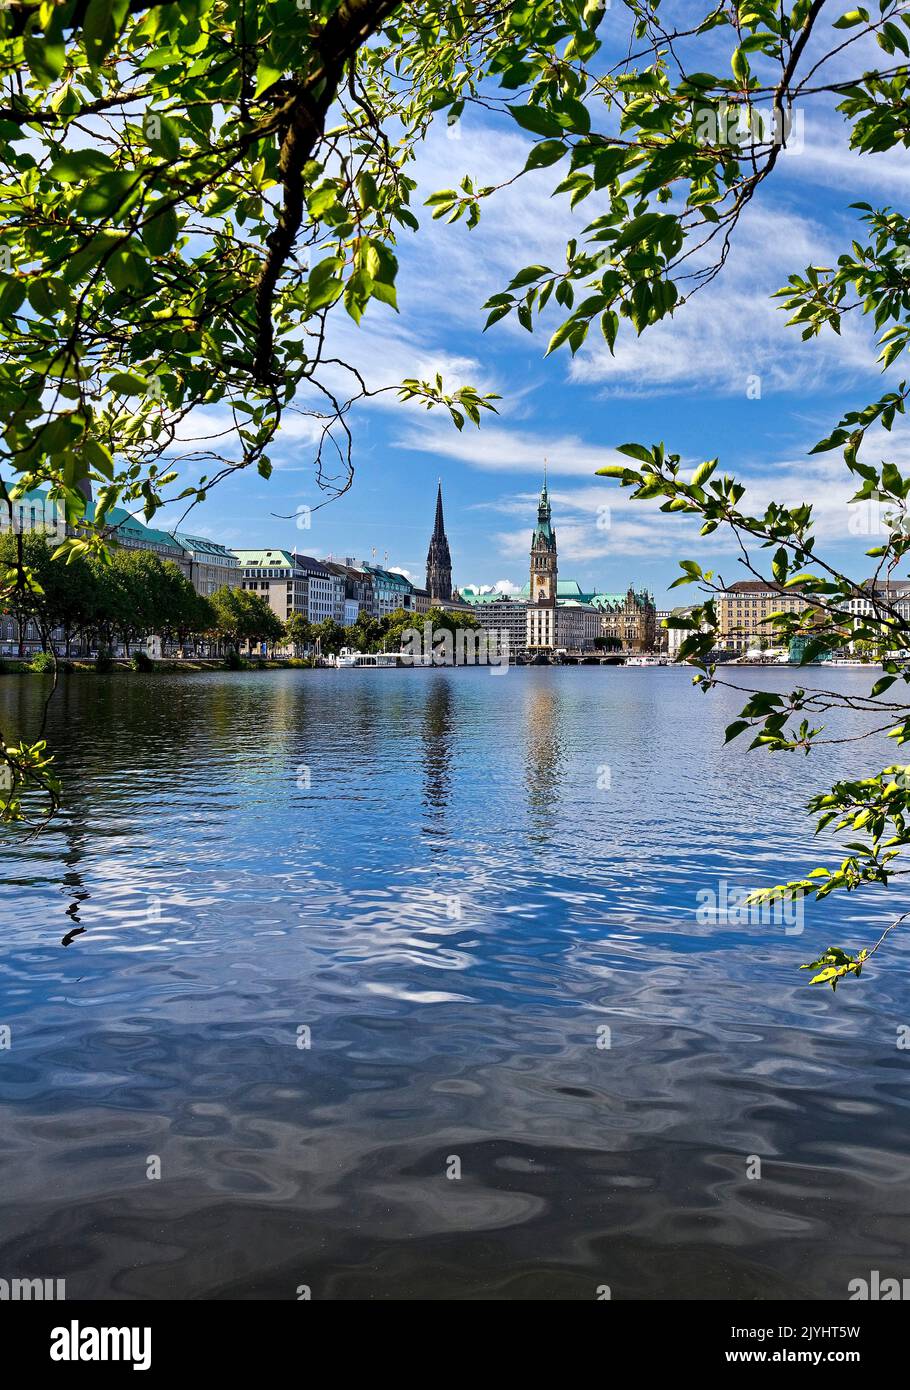 Inner Alster Lake with city scape, Germany, Hamburg Stock Photo